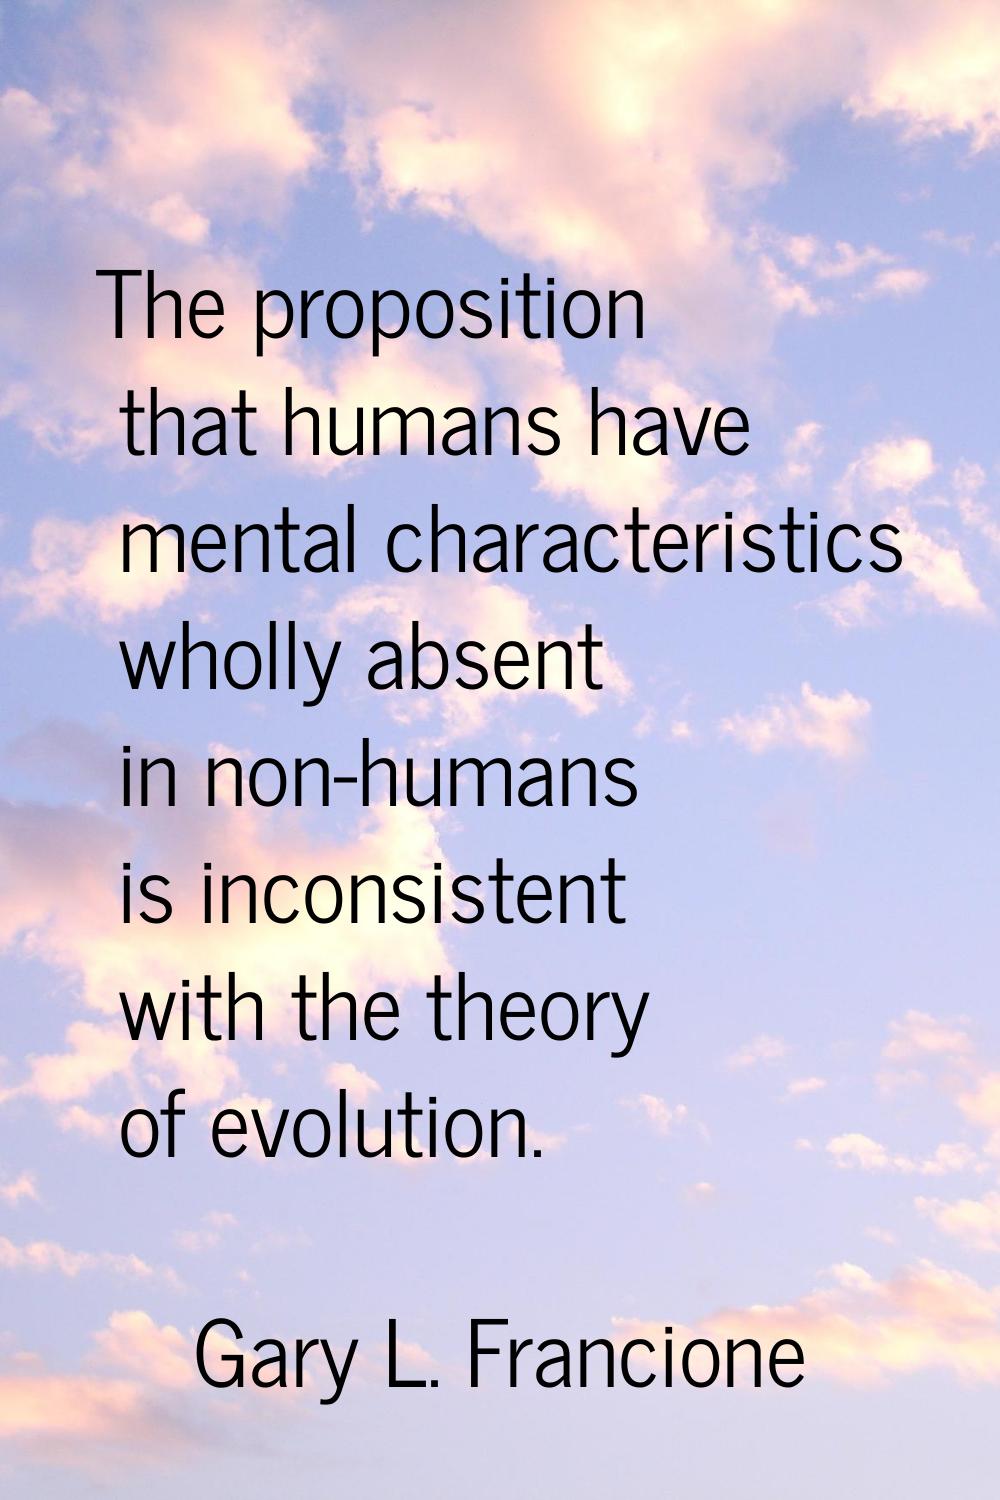 The proposition that humans have mental characteristics wholly absent in non-humans is inconsistent